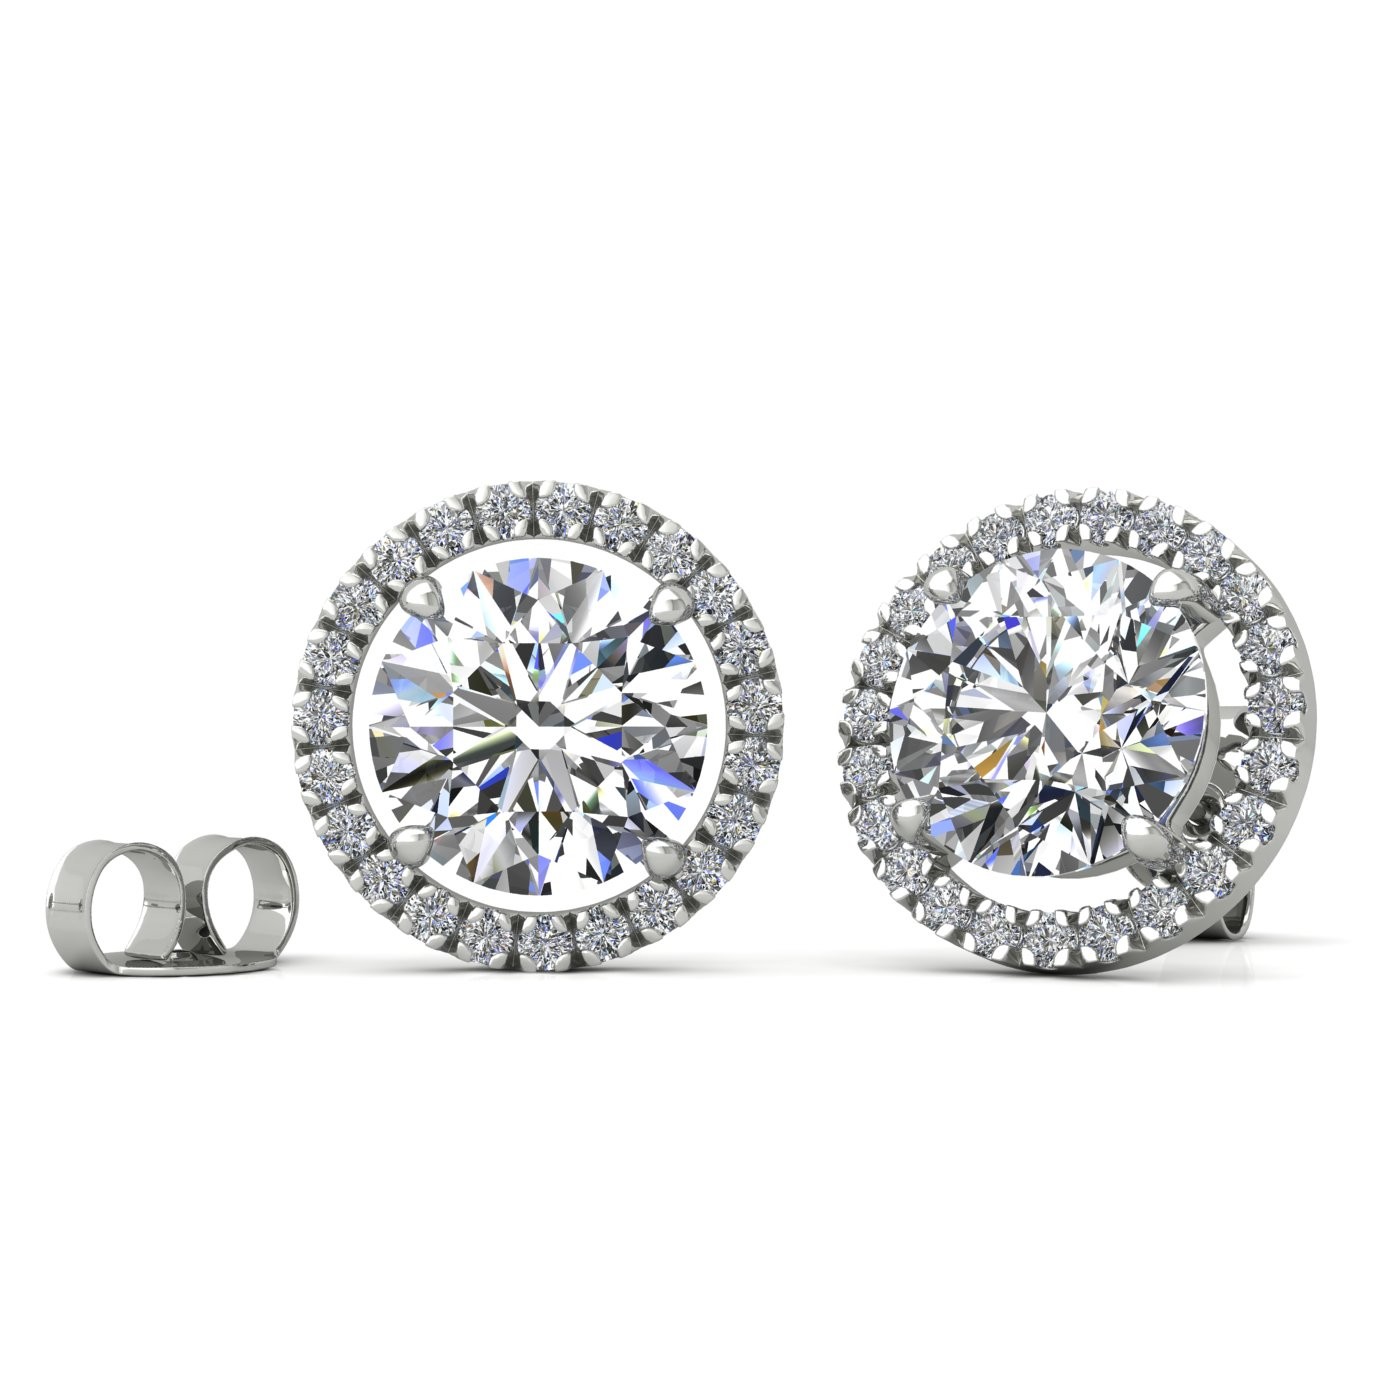 18k white gold  0,5 ct each (1tcw) 4 prongs round brilliant cut halo diamond earring studs Photos & images